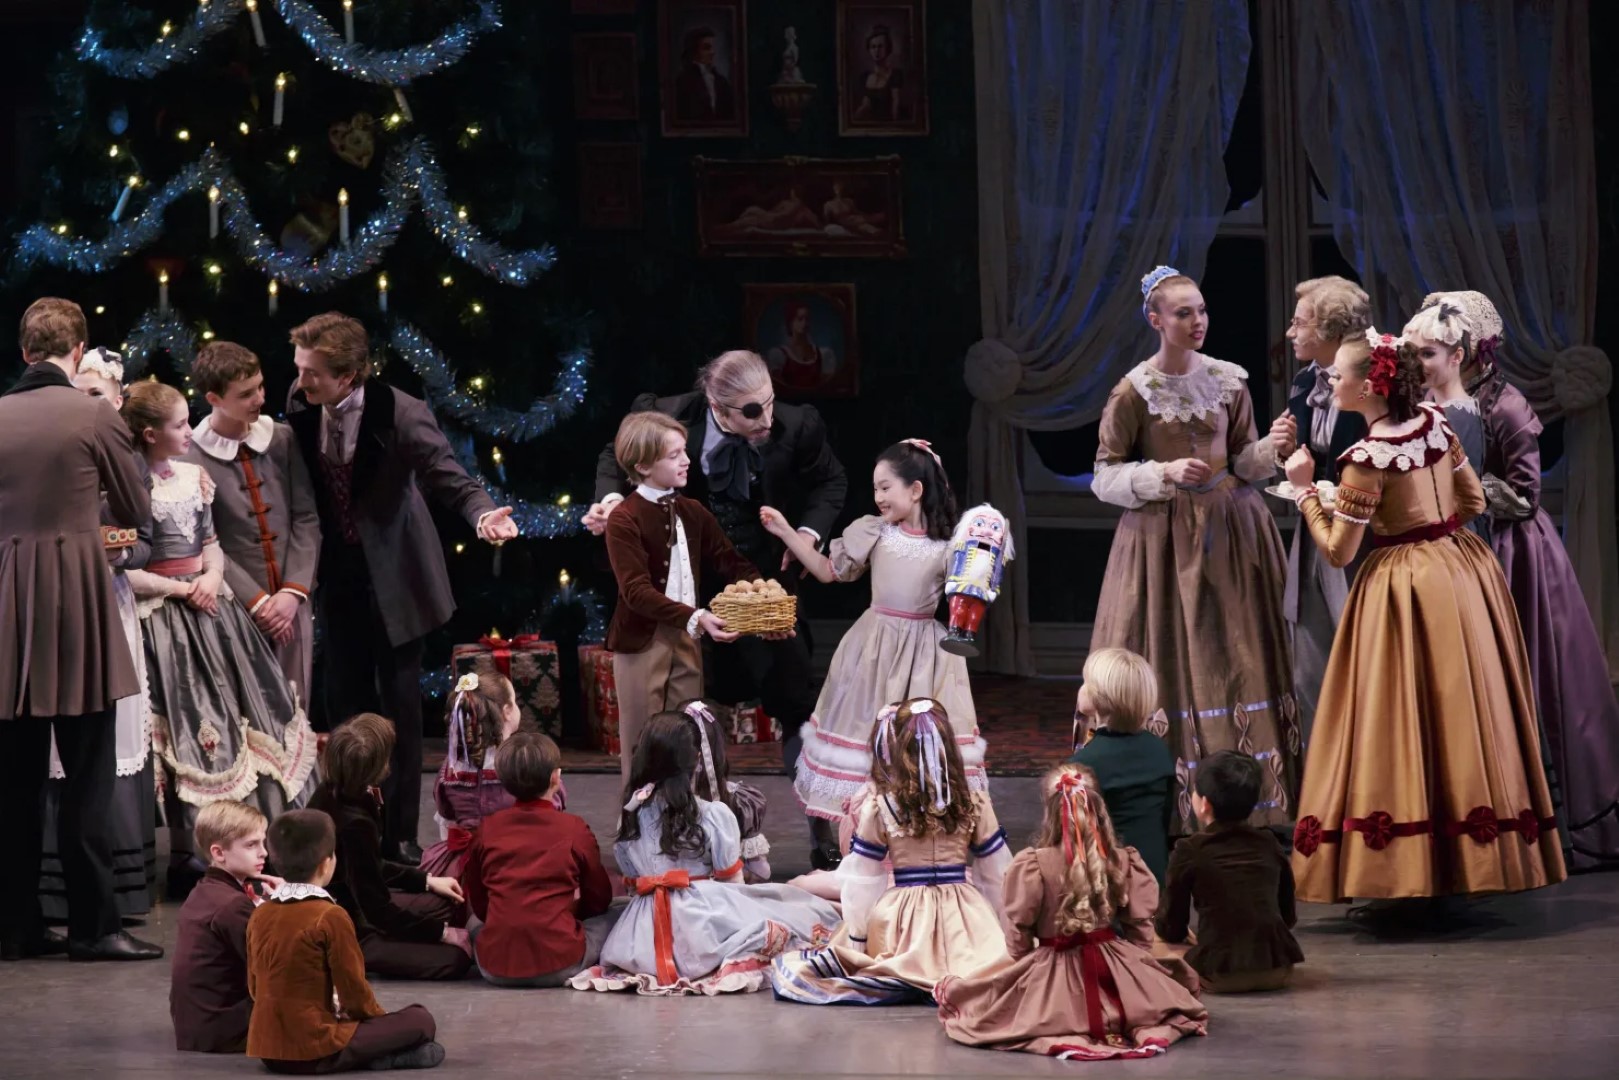 A photo from George Balanchine's The Nutcracker®